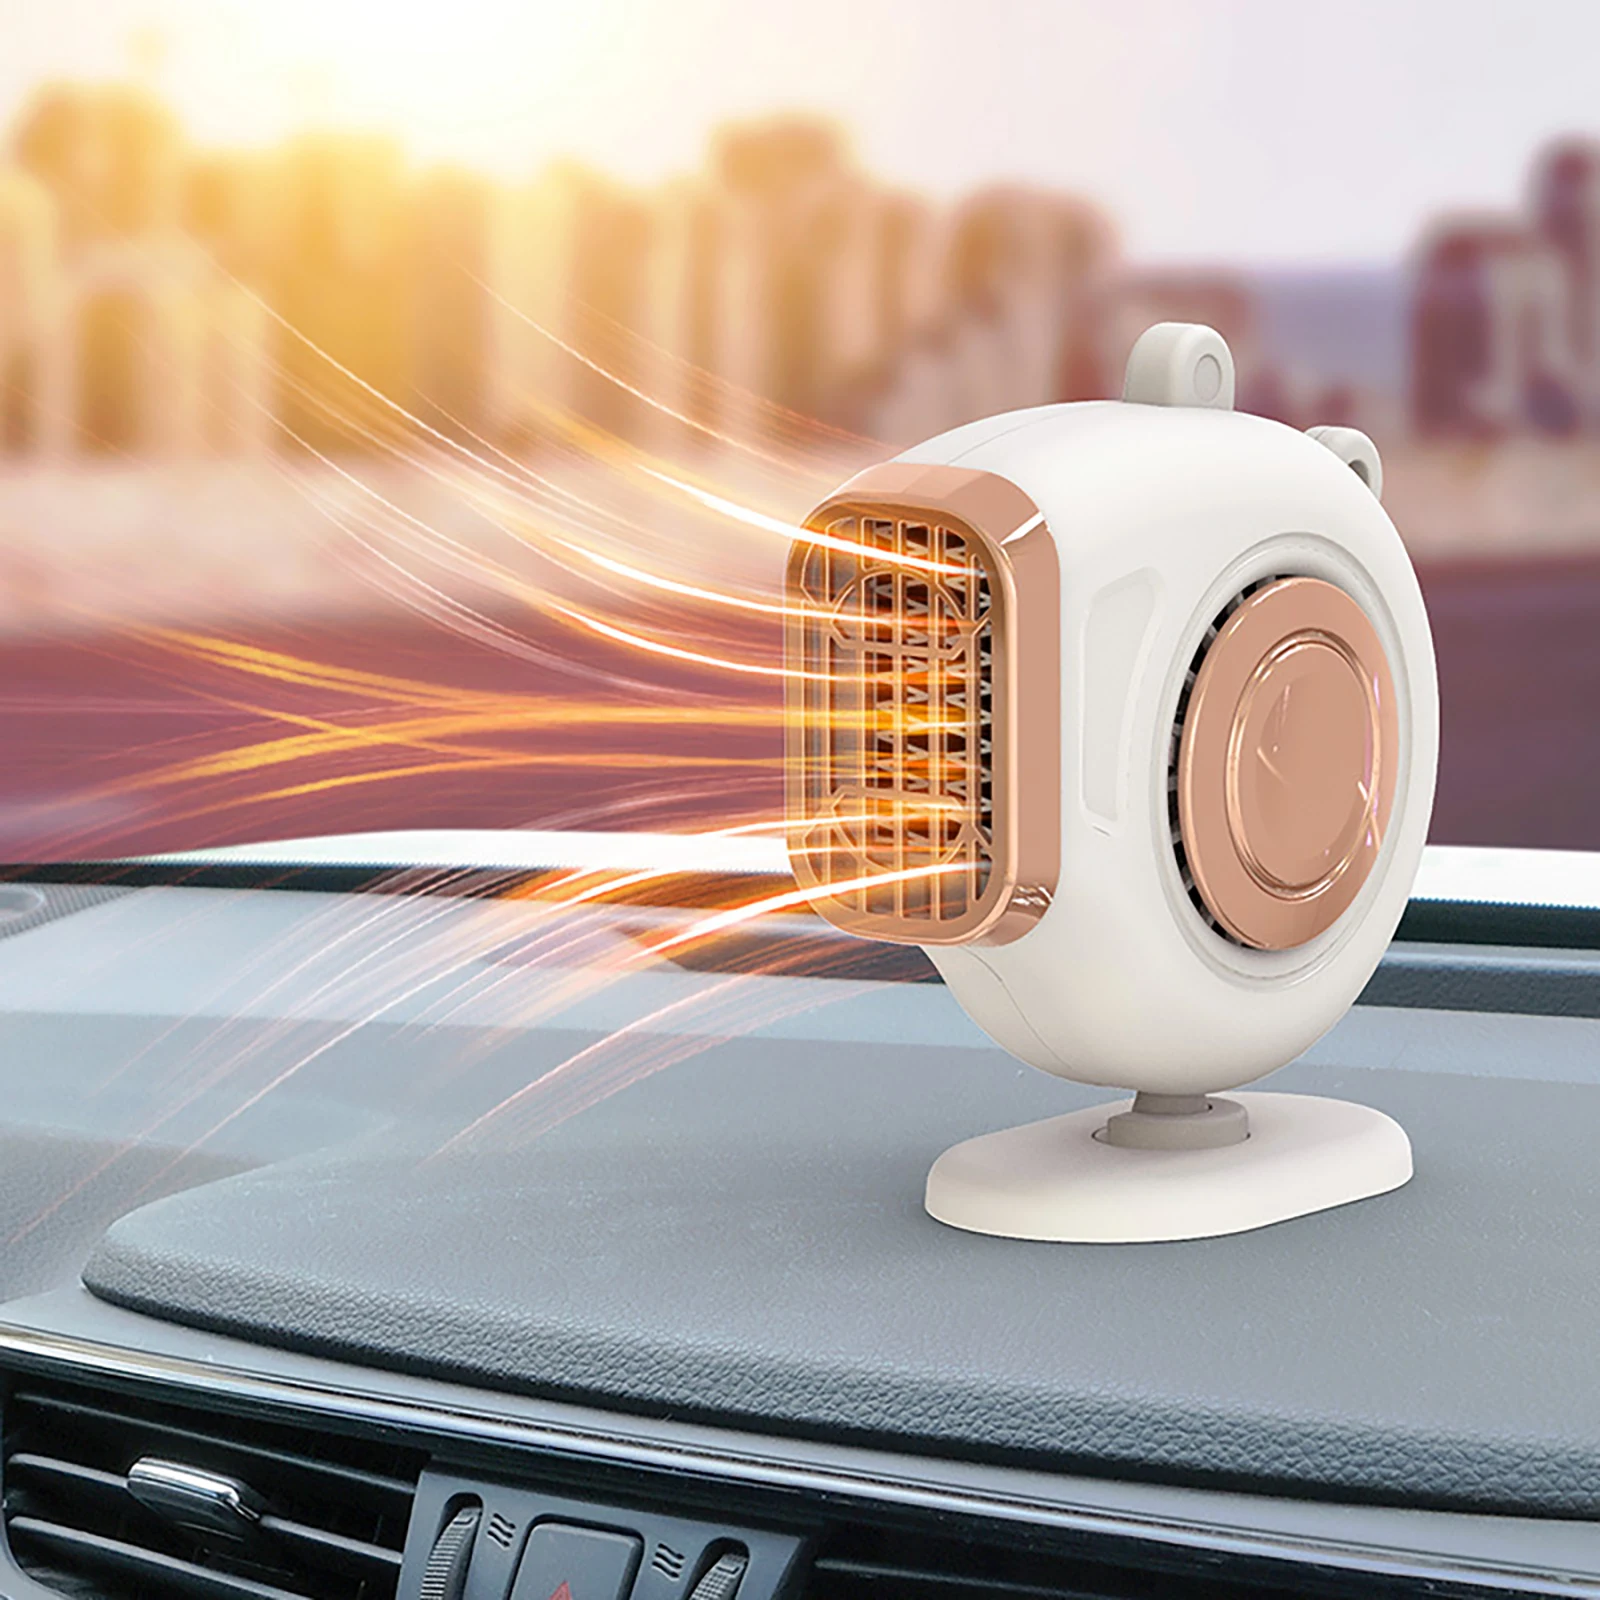 

150W Car Heater 12V/24V Portable Heating/Cooling Fan 360-Degree Adjustable Defrosting Defogging Air Purifier Auto Accessories